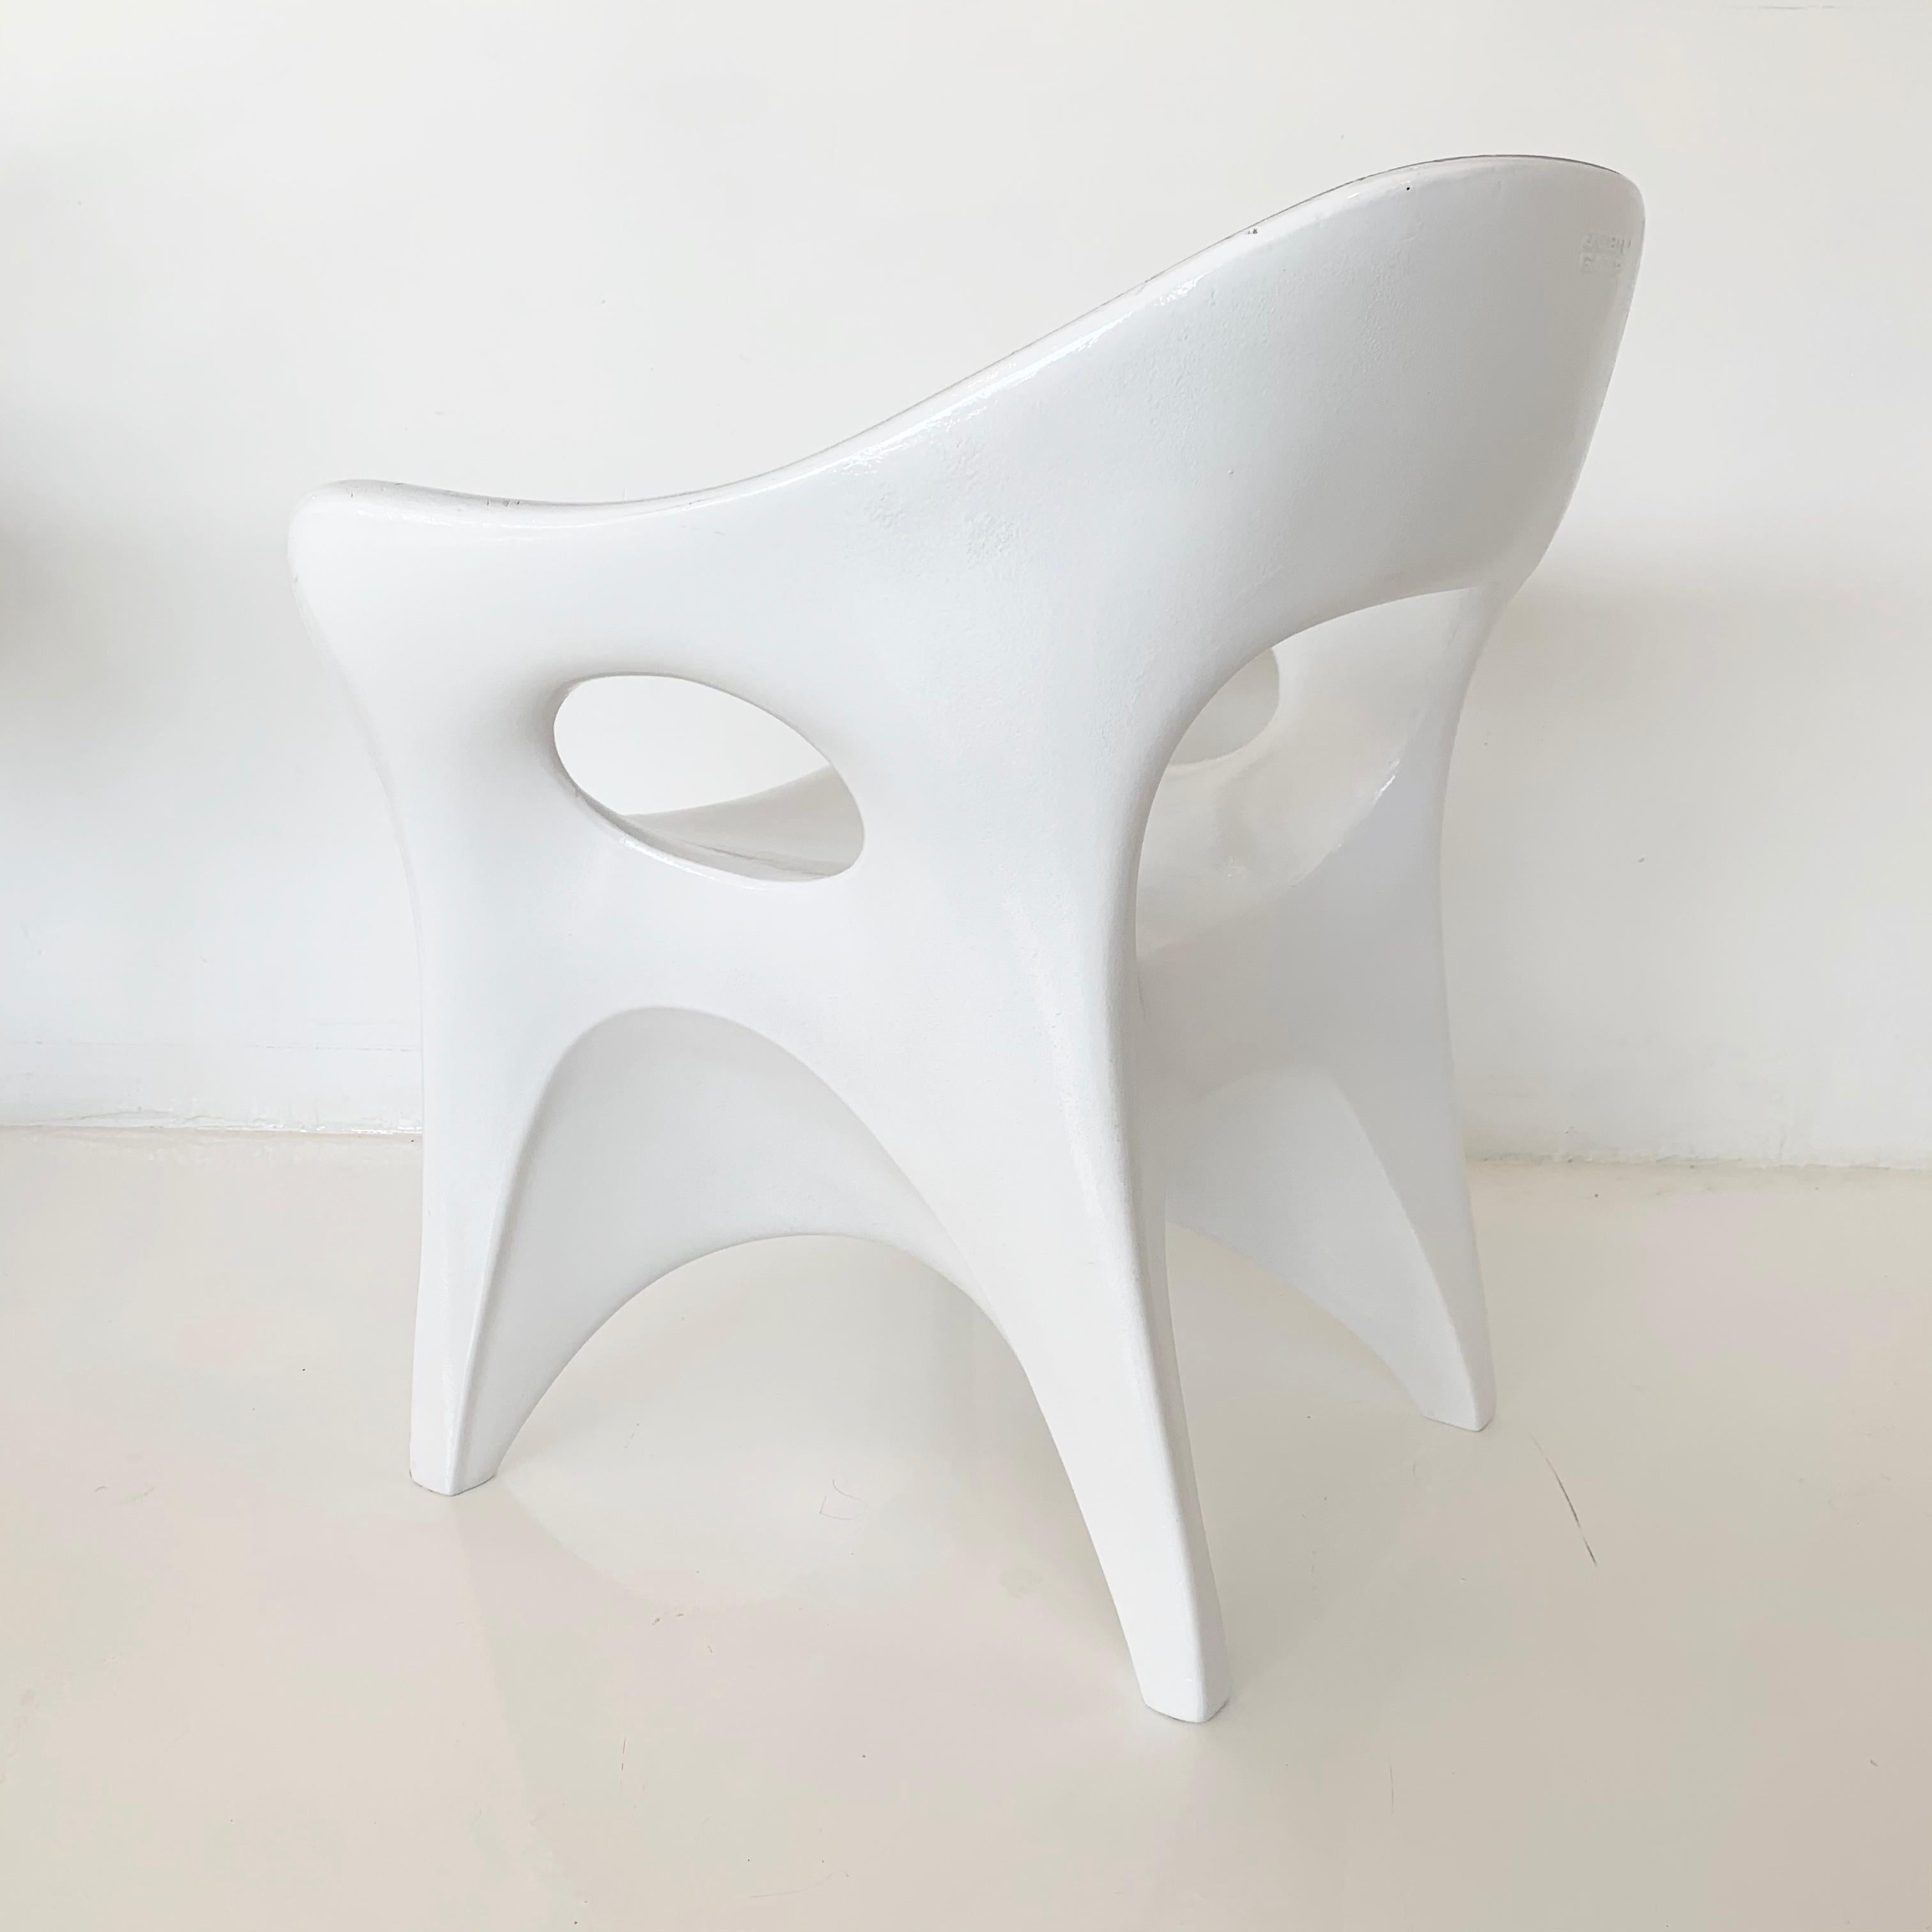 Mid-20th Century Set of 4 Sculptural Plastic Chairs by John Gale, 1963 For Sale